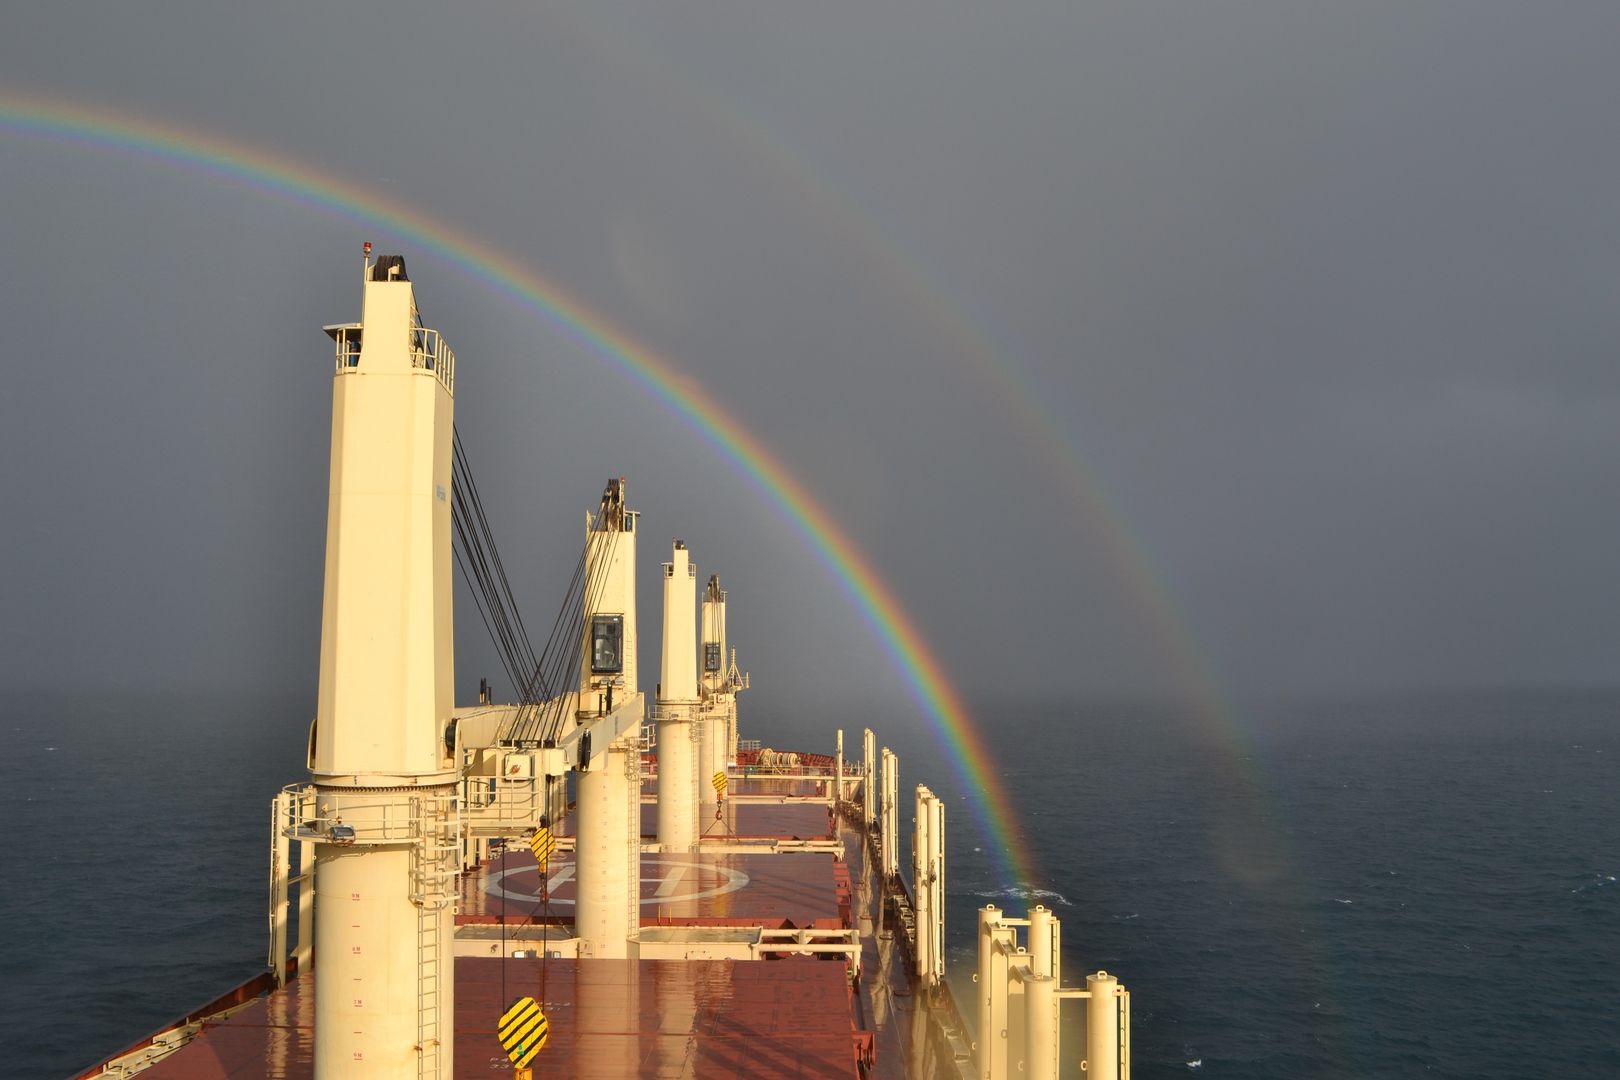 View from the bridge of a bulk carrier as it sails towards a rainbow